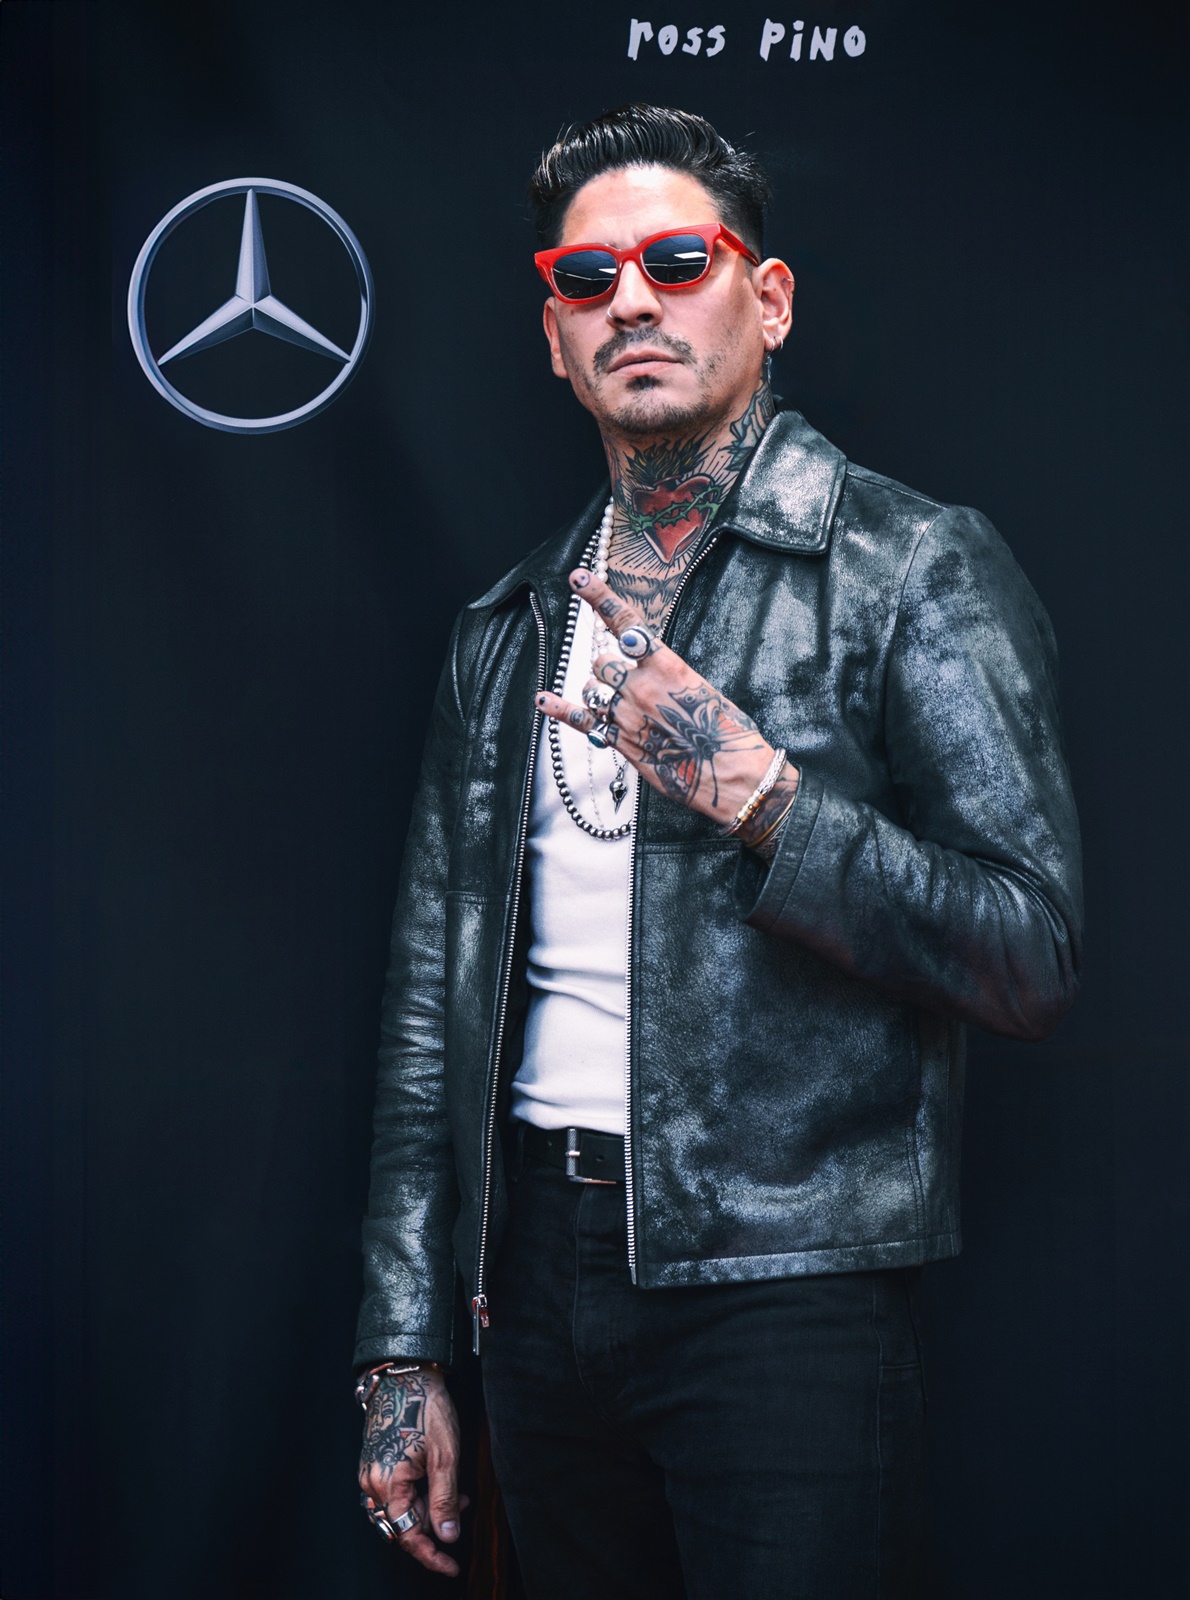 ROSS PINO X MERCEDES-BENZ MANHATTAN: Ross Pino To Collab In a Solo Art Show with Mercedes-Benz Manhattan “The Gentleman’s Experience”